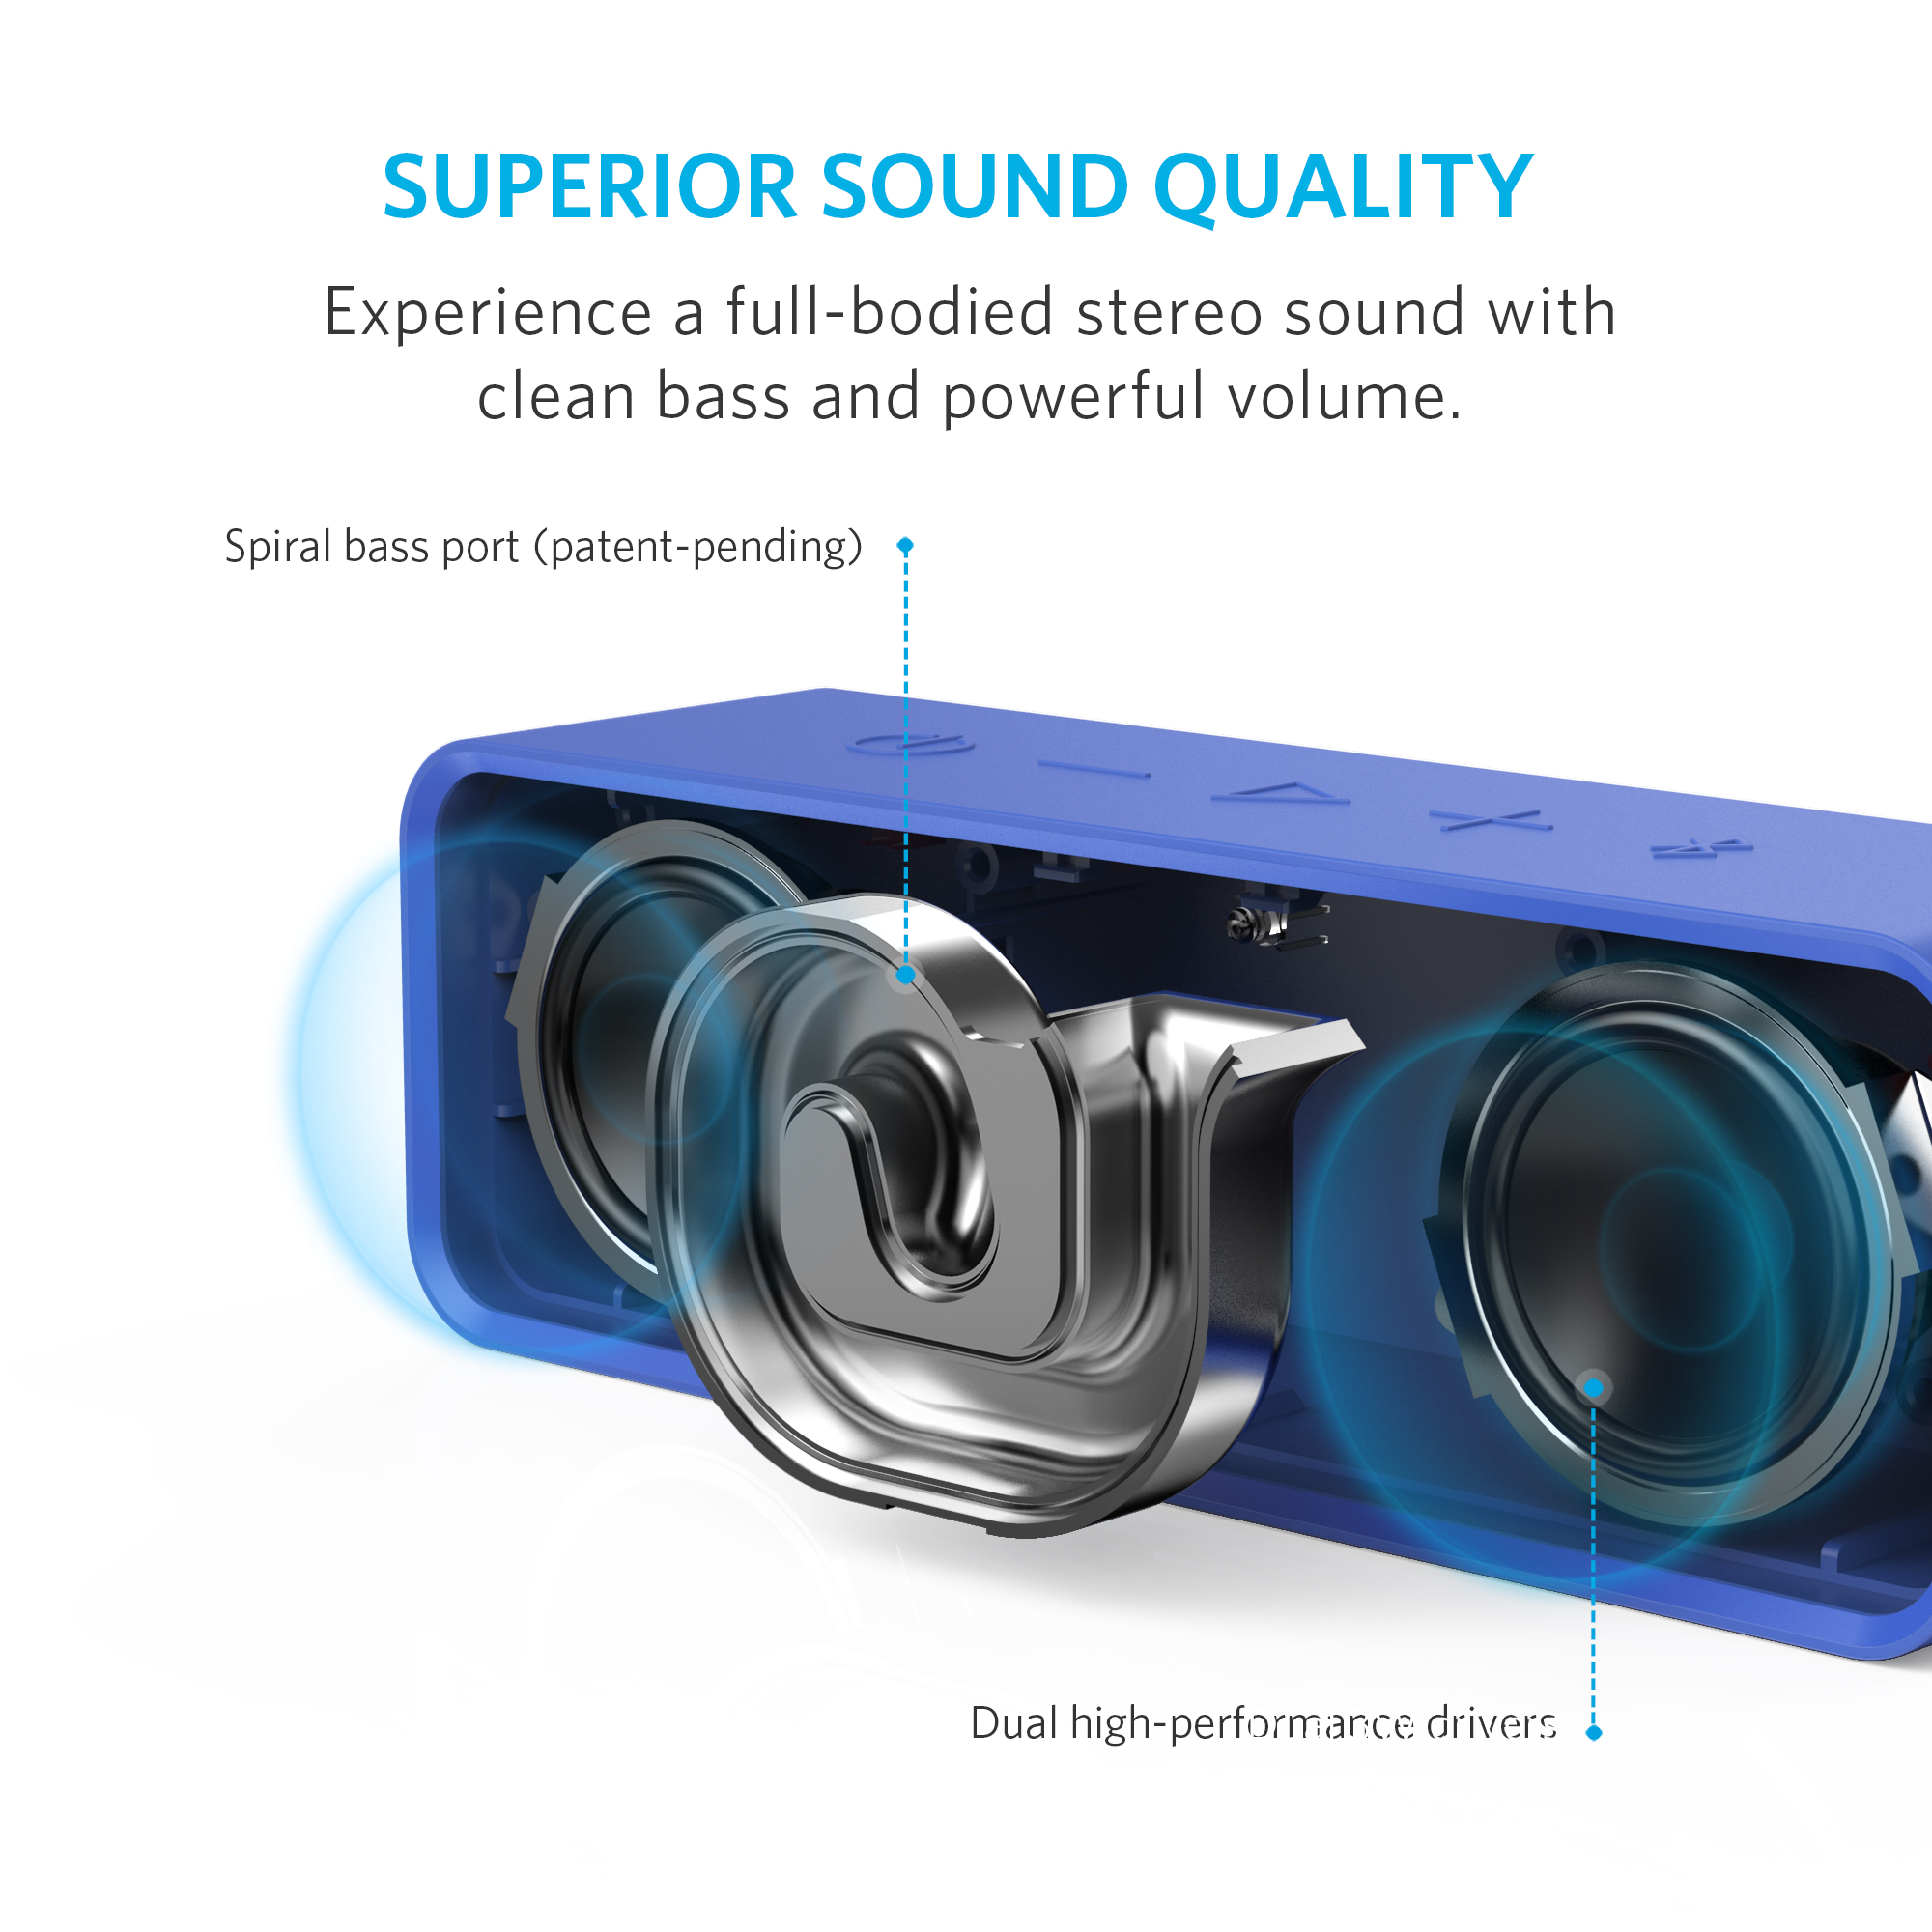 Anker Soundcore Bluetooth Speaker with 24-Hour Playtime, 66-Feet Bluetooth Range & Built-in Mic, Dual-Driver Portable Wireless Speaker with Low Harmonic Distortion and Superior Sound - Blue Blue Speaker - image 4 of 4